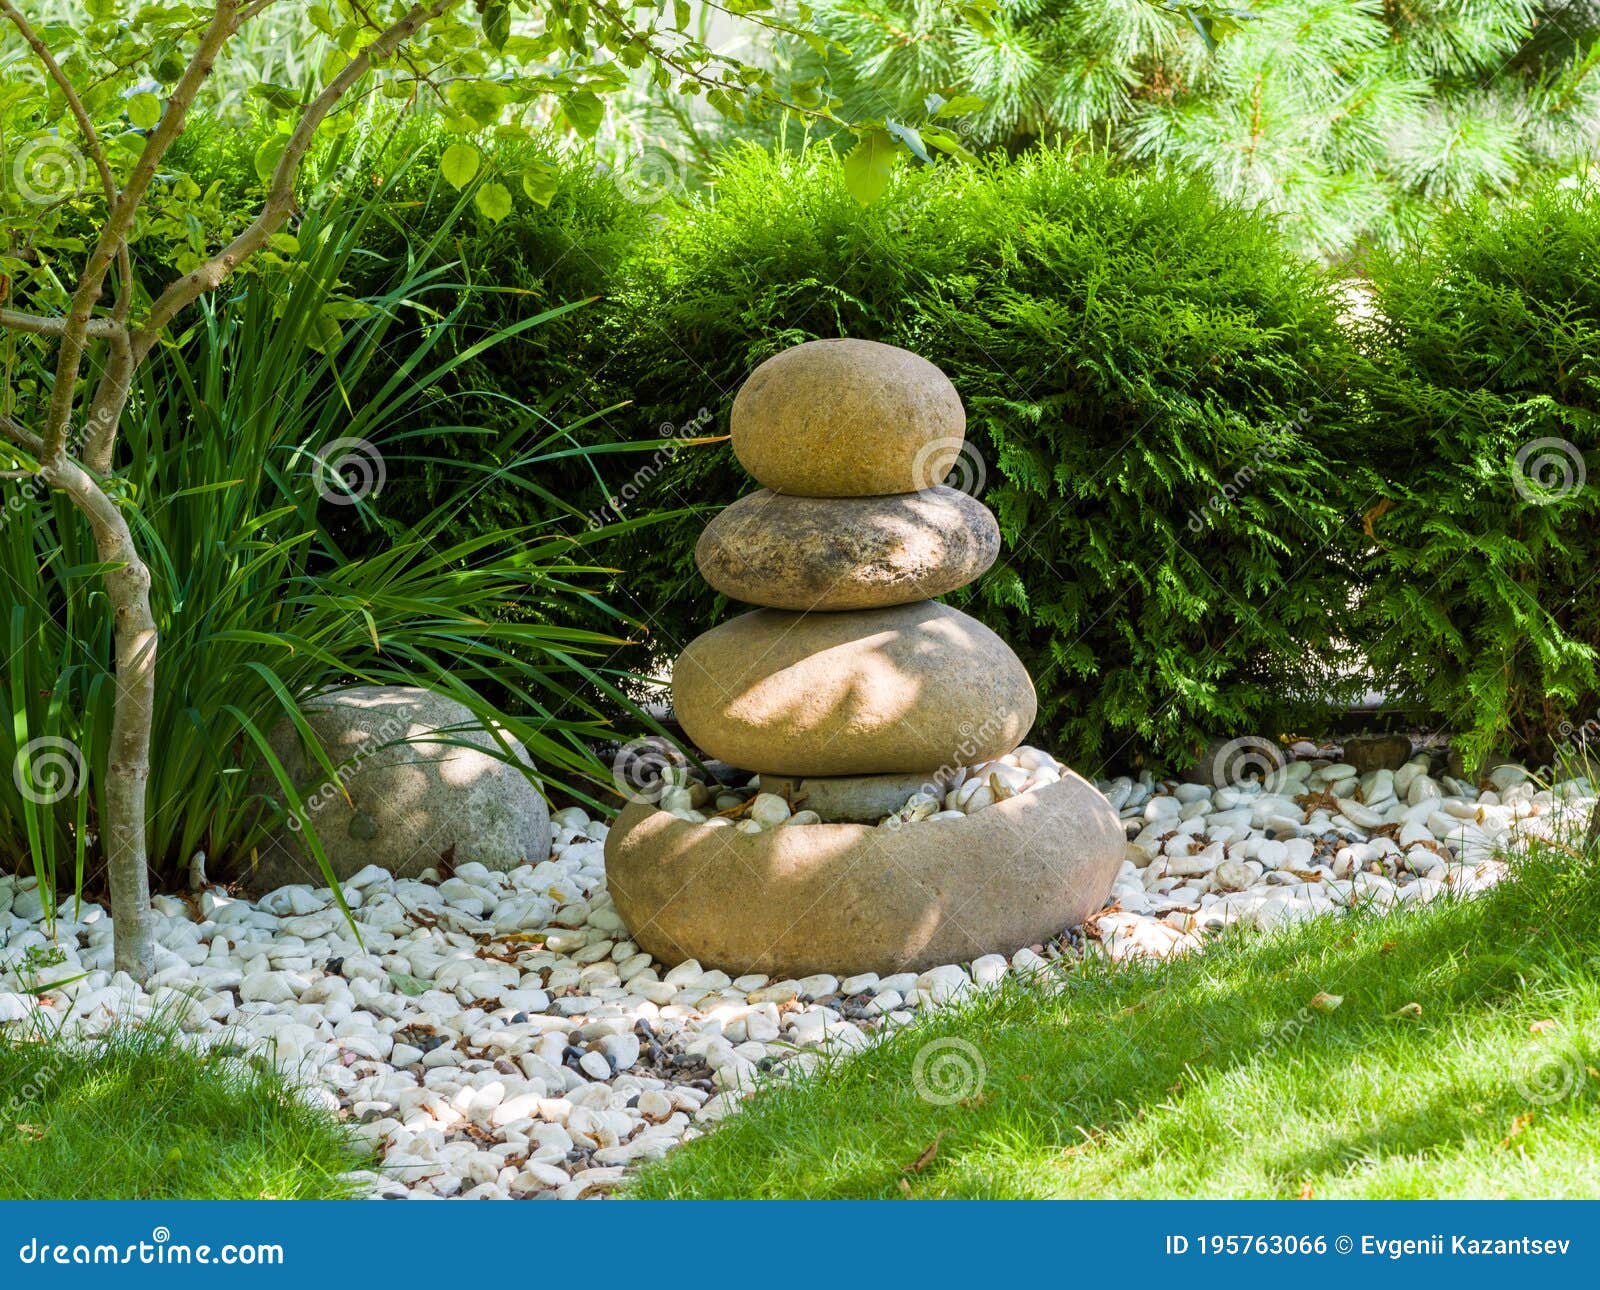 Pyramid Of Stones In The Park Element Of Landscape Design Stock Photo Image Of Landscape Oriental 195763066